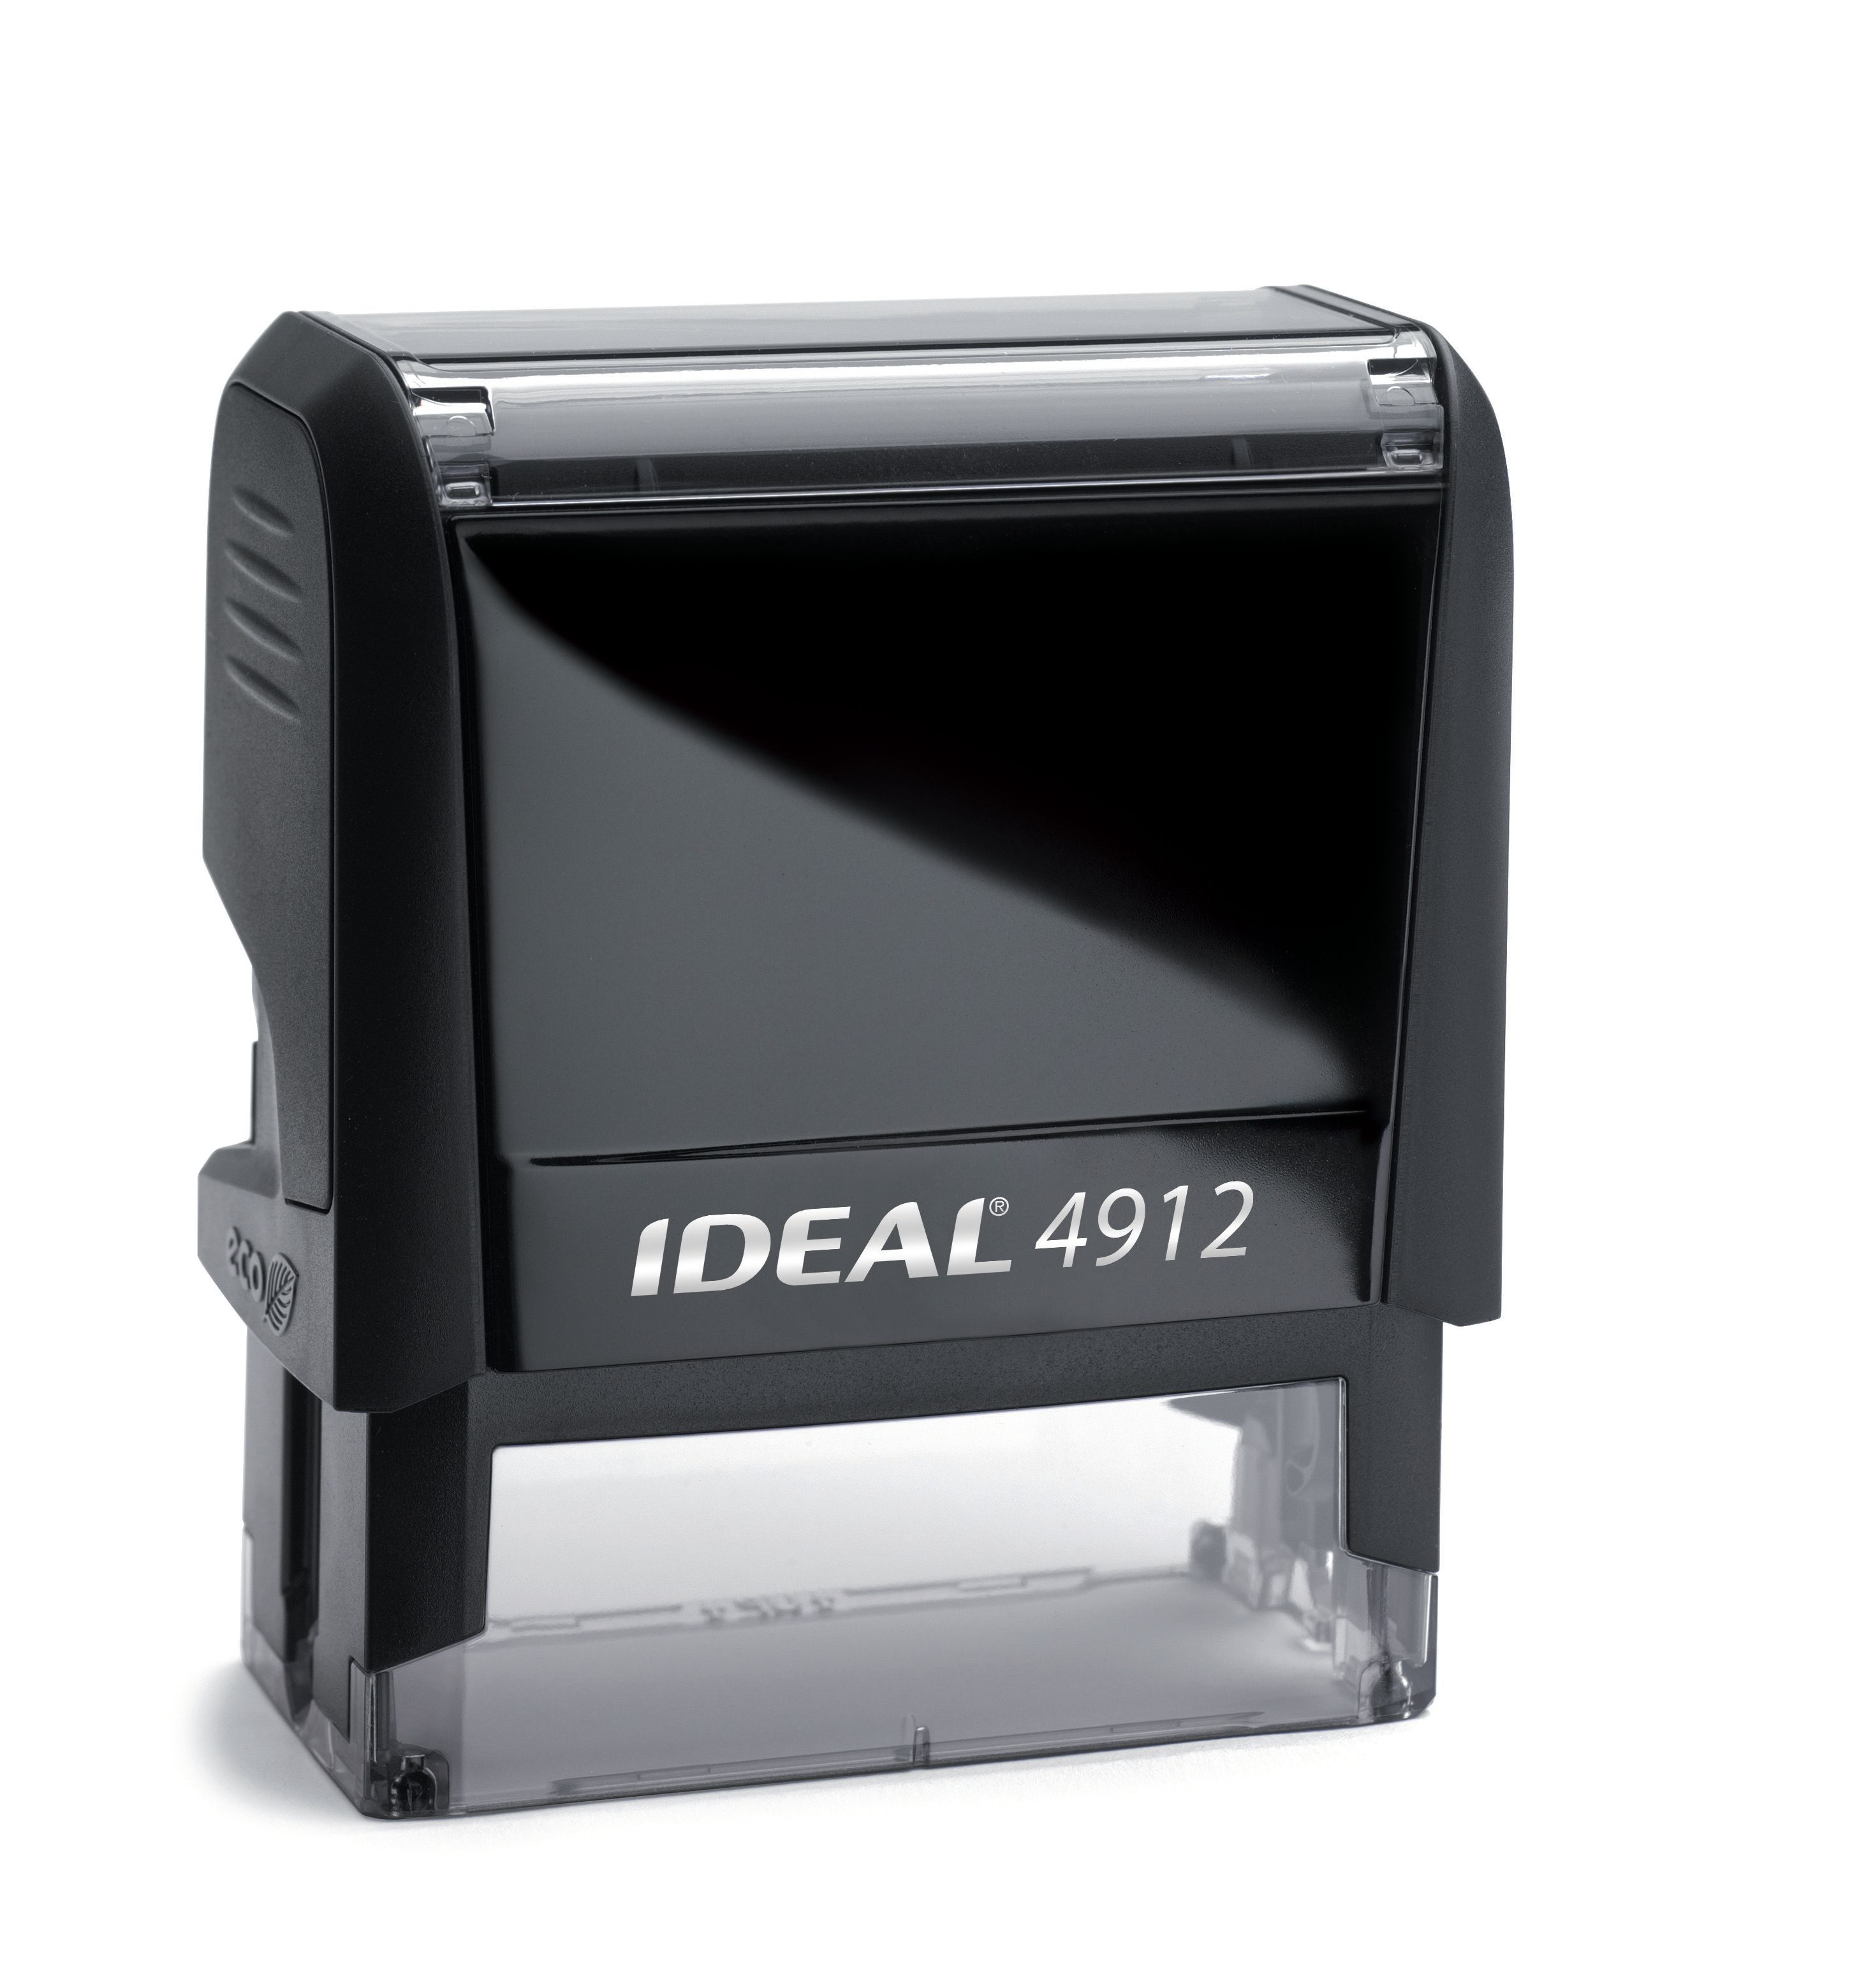 Ideal 4912 Self Inking Stamp